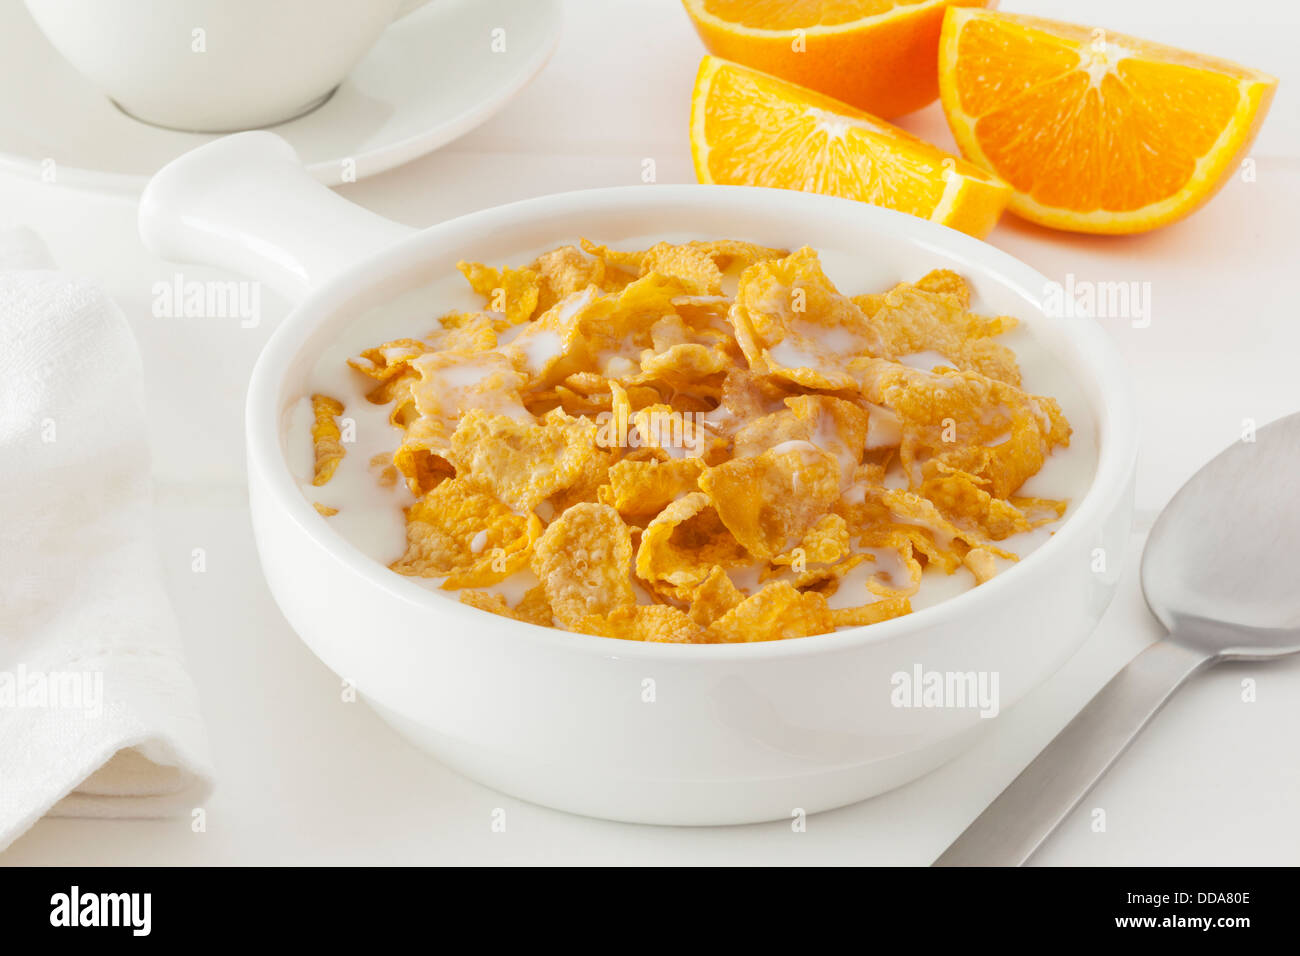 Cornflakes with Milk - a bowl of cornflakes with milk in a light bright setting. Stock Photo